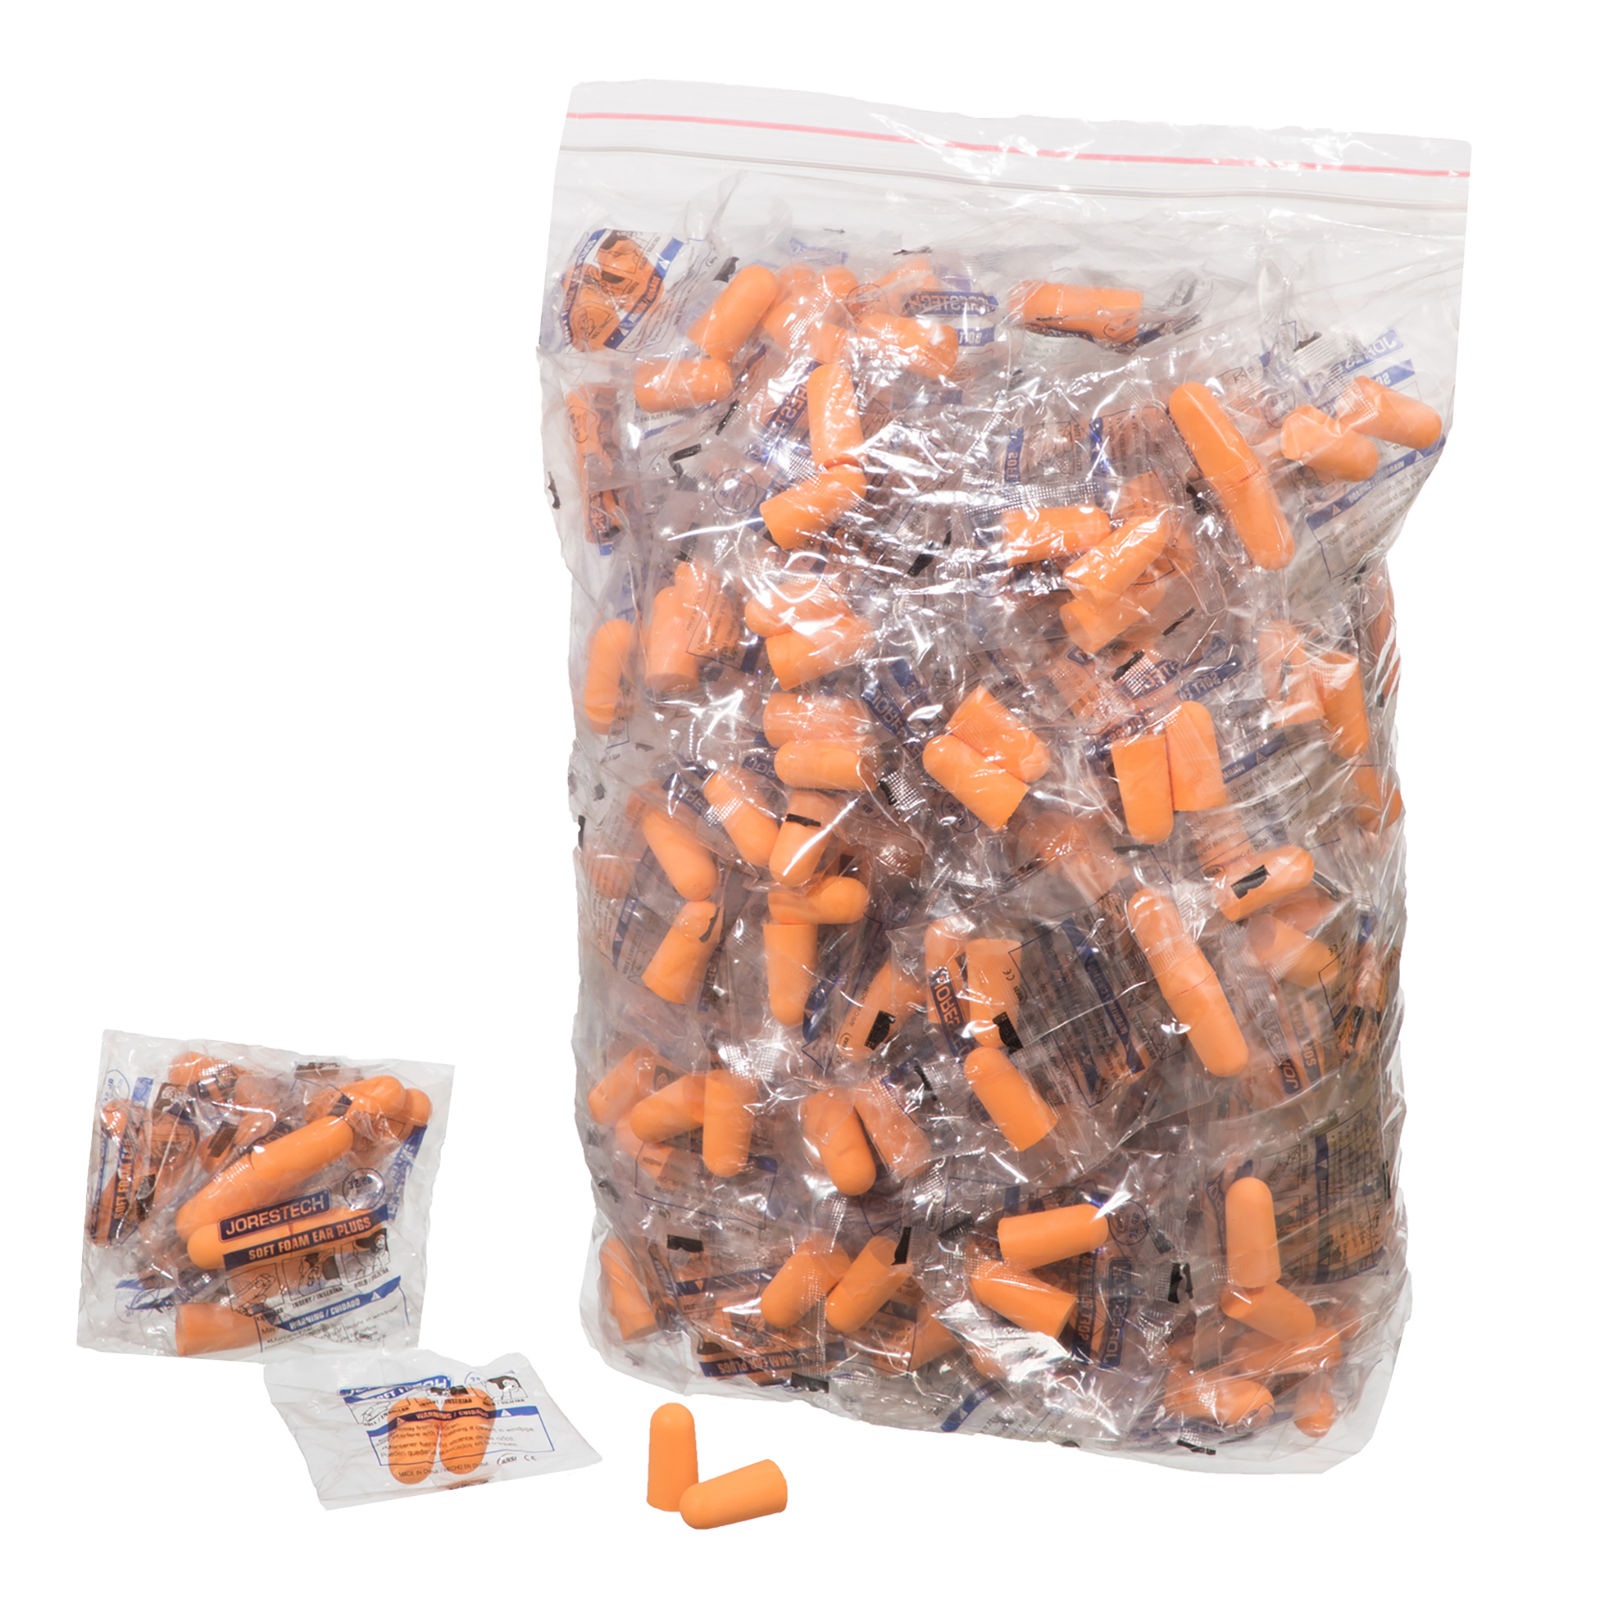 Pack of 200 pairs of individually packed JORESTECH® soft foam 32DB-NRR ear plugs over white background